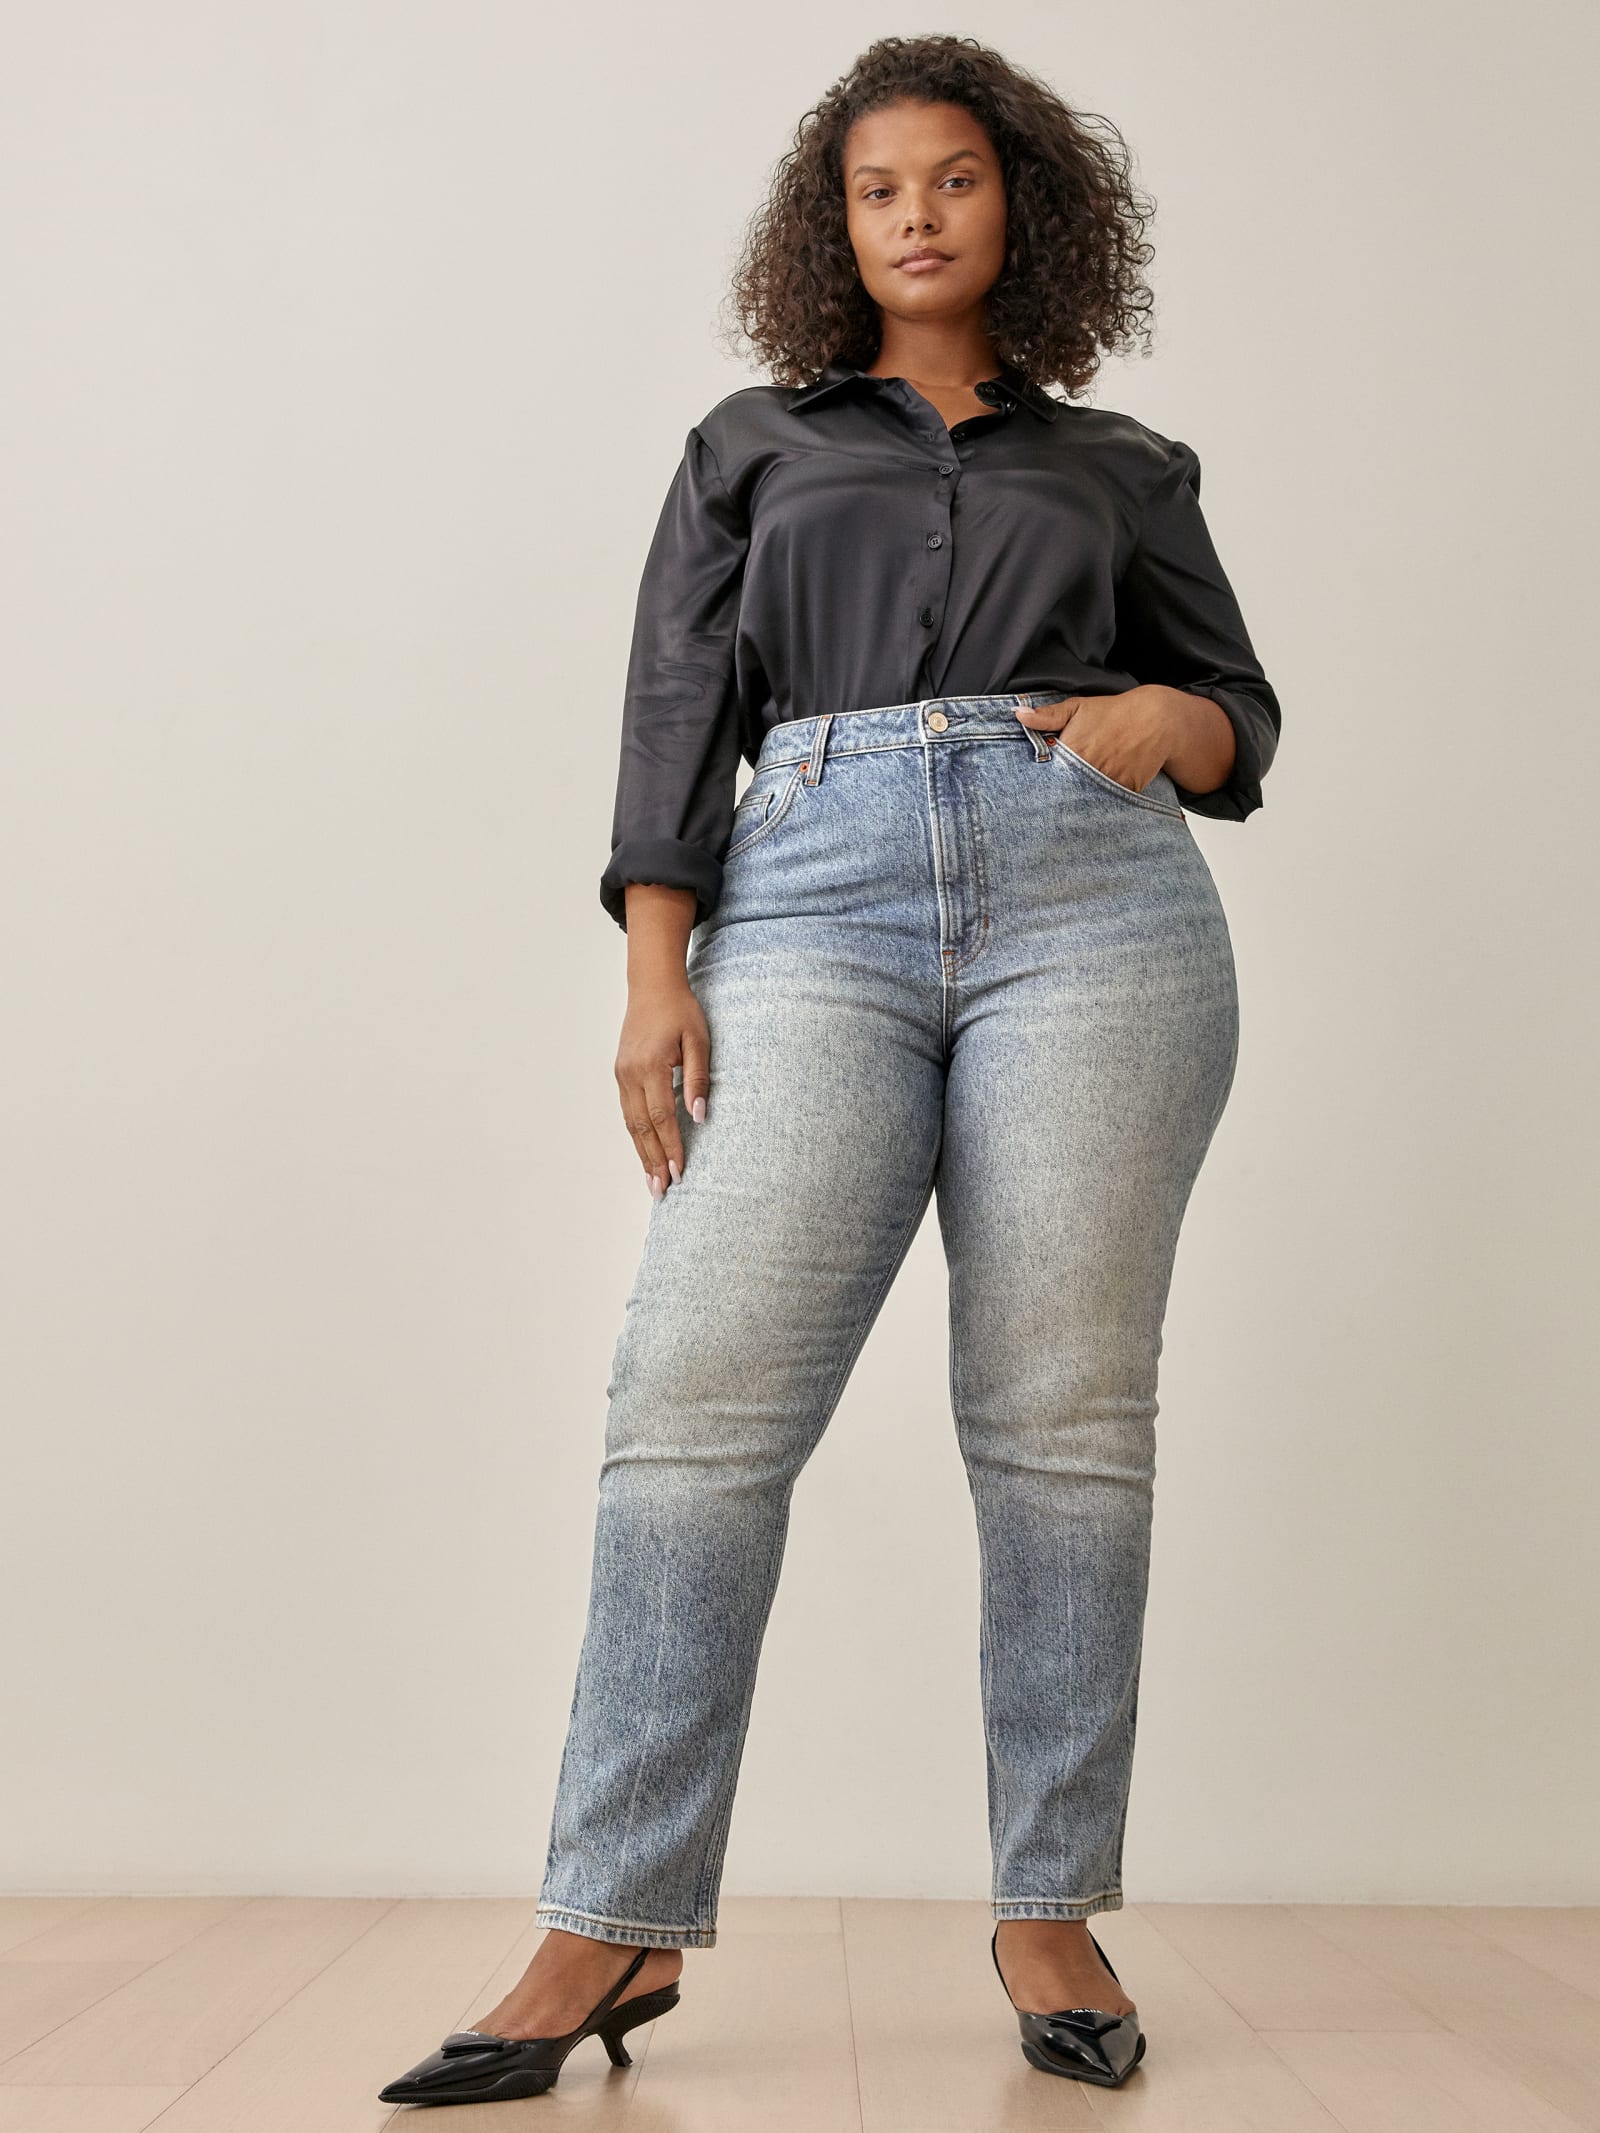 How to Stretch and Shrink Your Denim: 6 Hacks to Try | Who What Wear